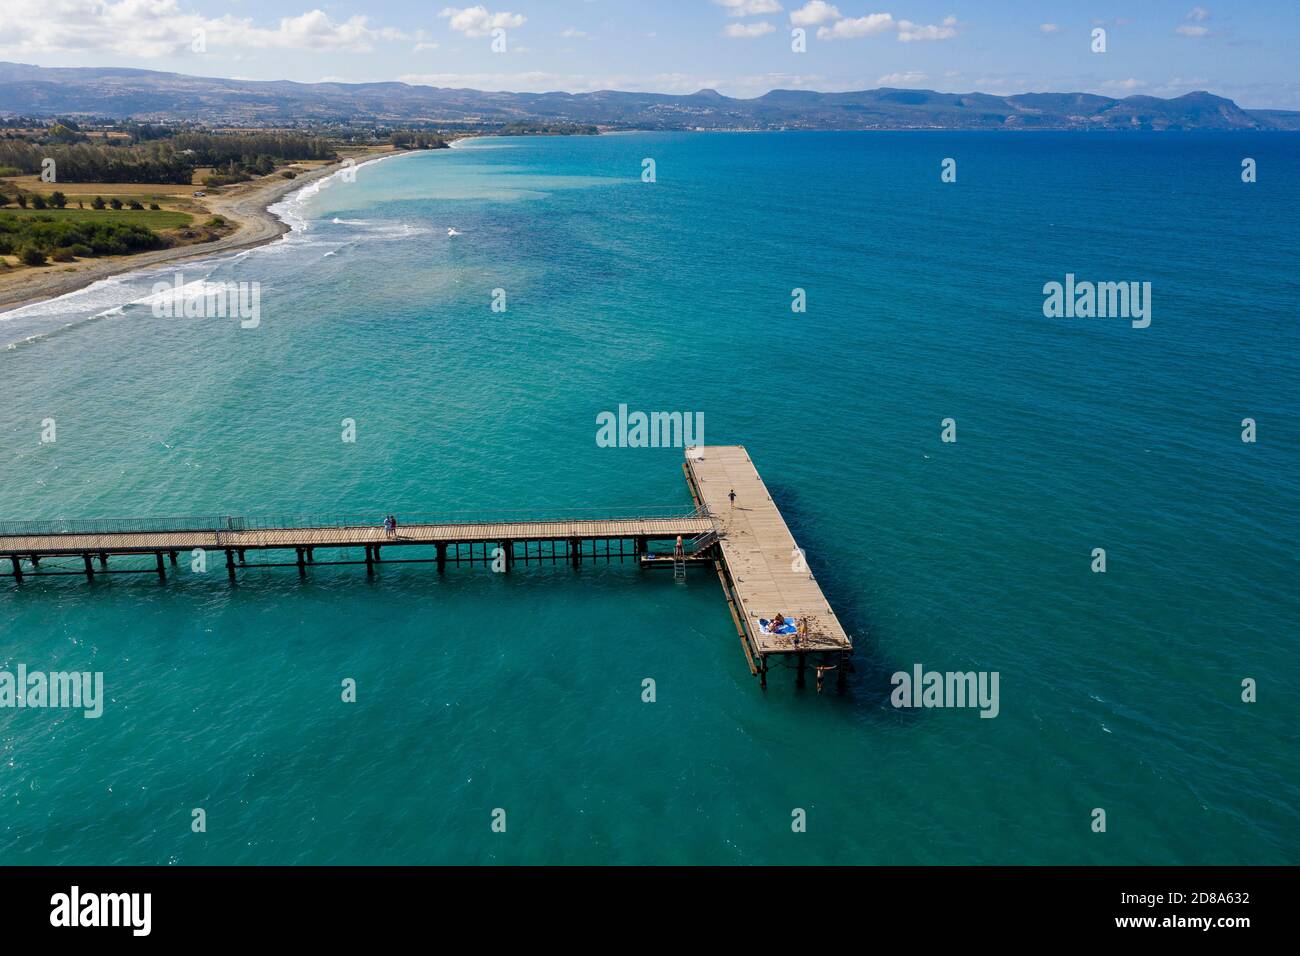 Aerial view of swimmers on Limni Pier near Argaka, Cyprus. Stock Photo